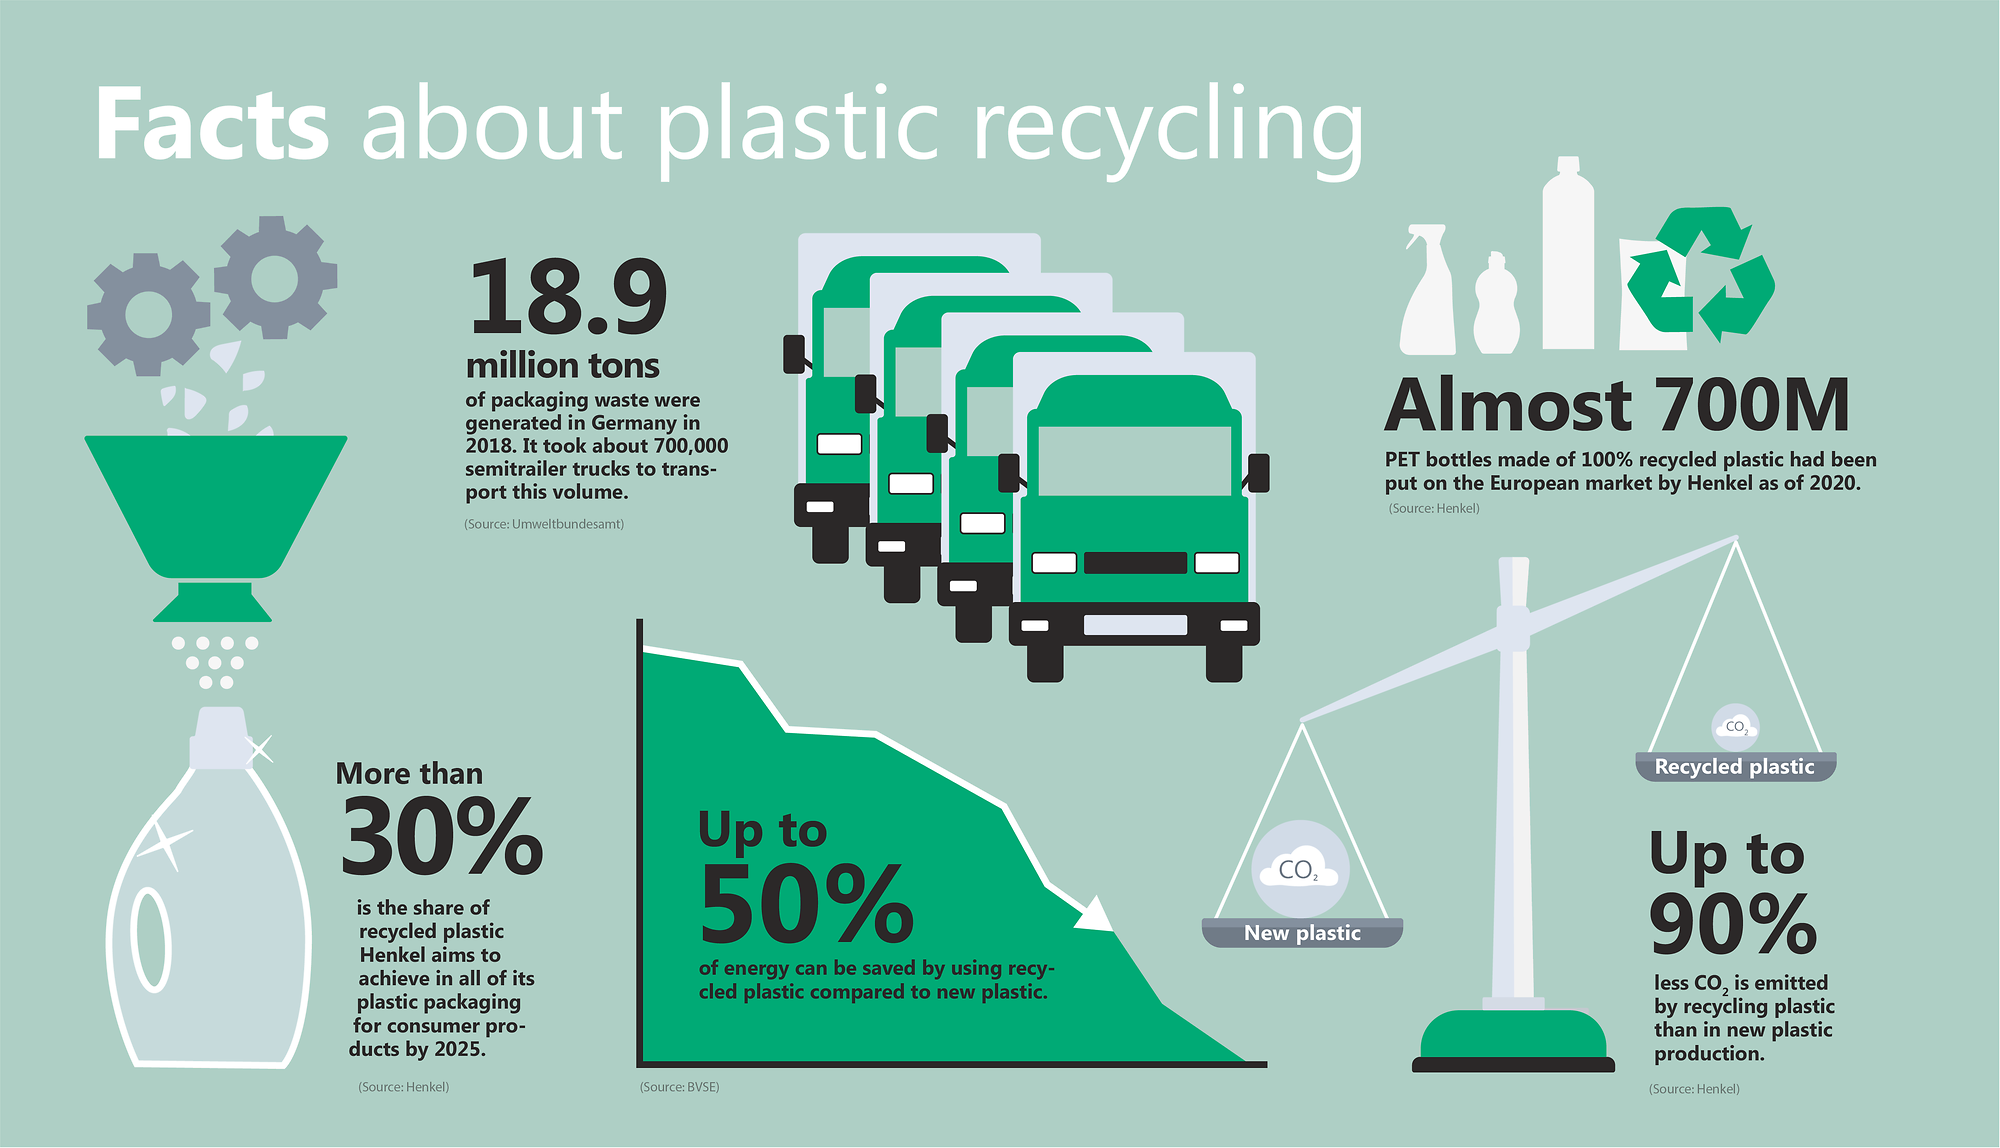 What goals and milestones Henkel is committed to regarding plastic recycling.